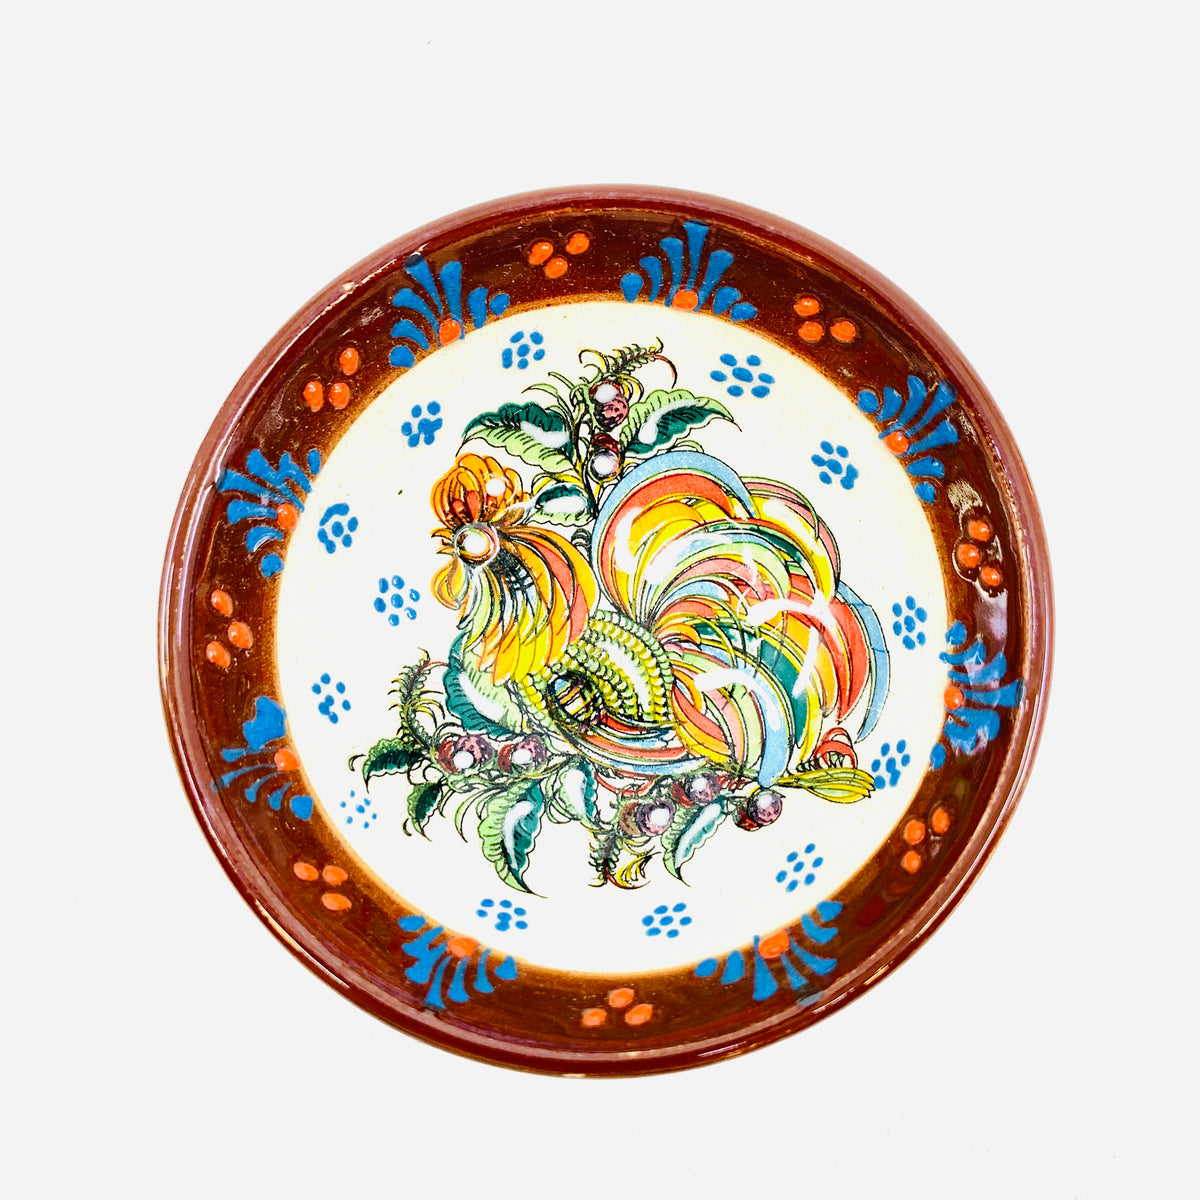 Handmade Turkish Bowl with Rooster Design 171